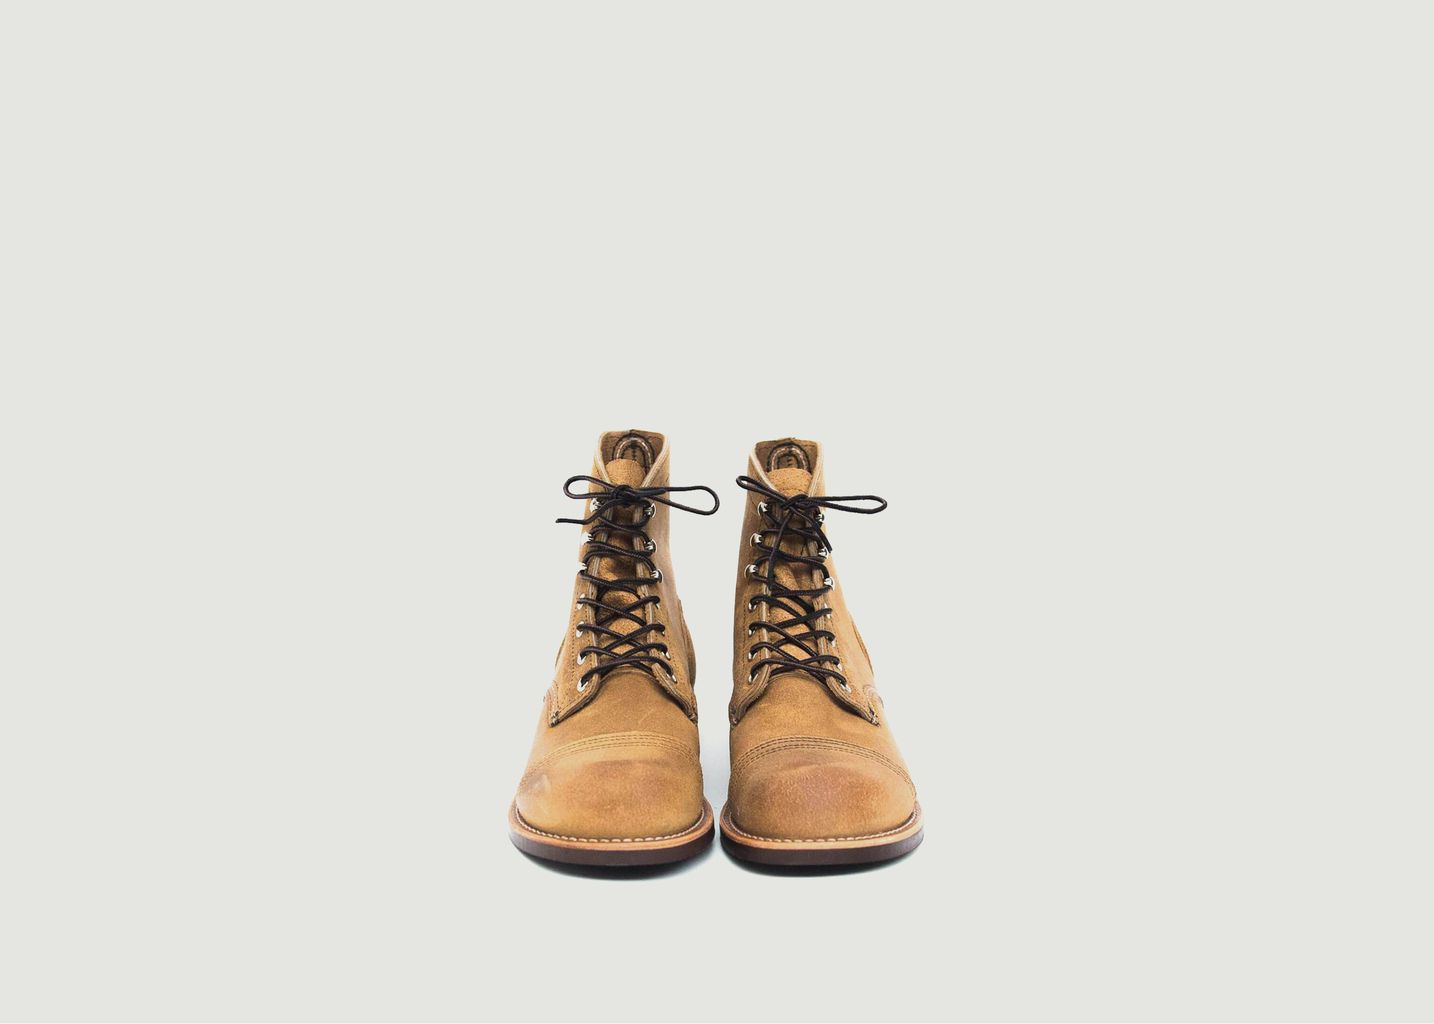 Iron ranger - Red Wing Shoes